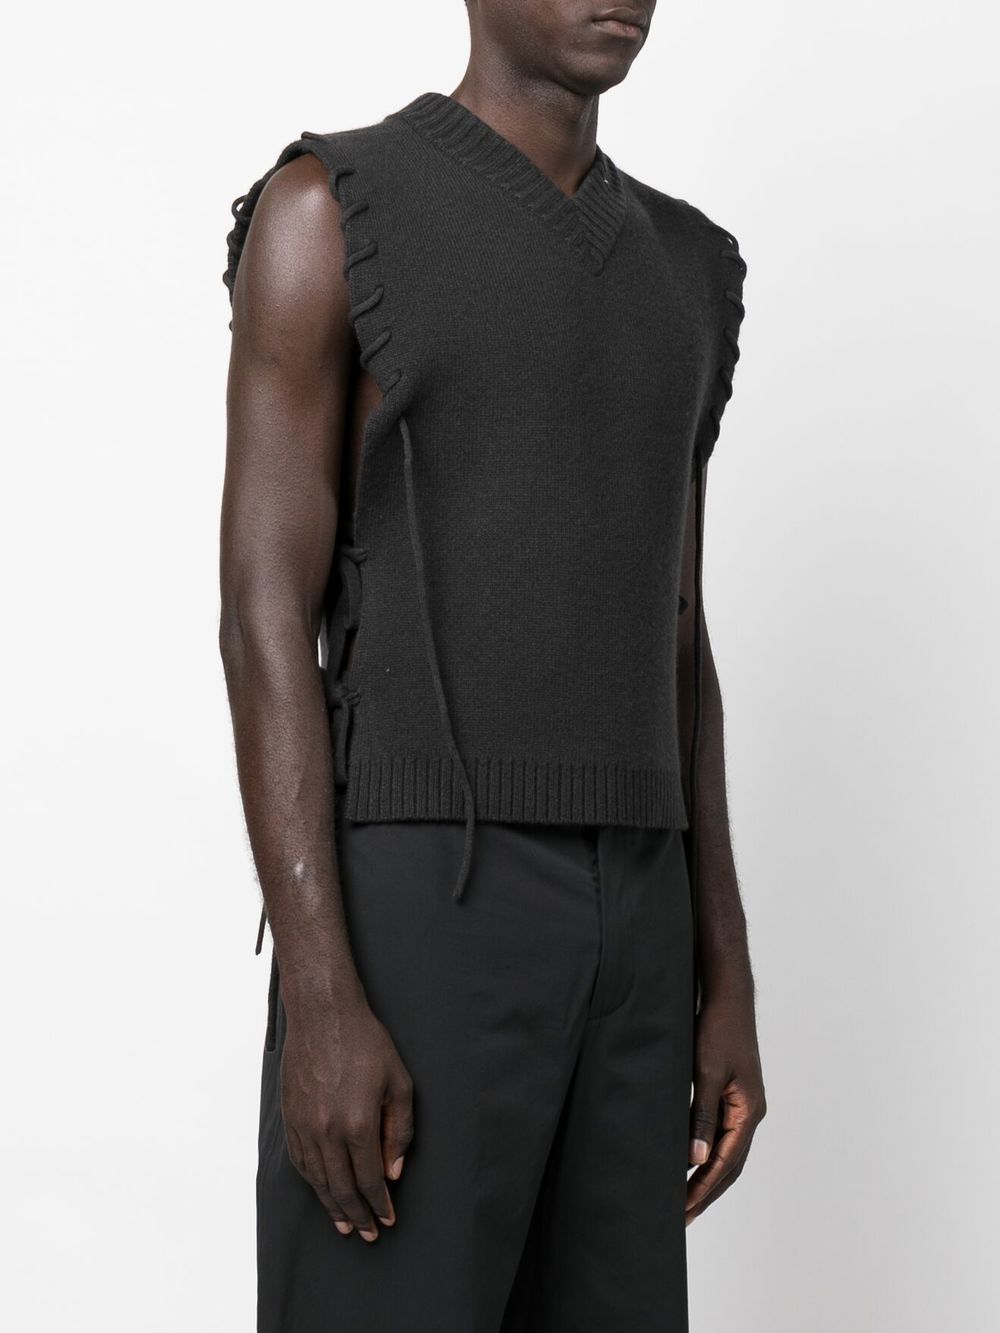 Craig Green lace-up Detail Knitted Vest - Farfetch